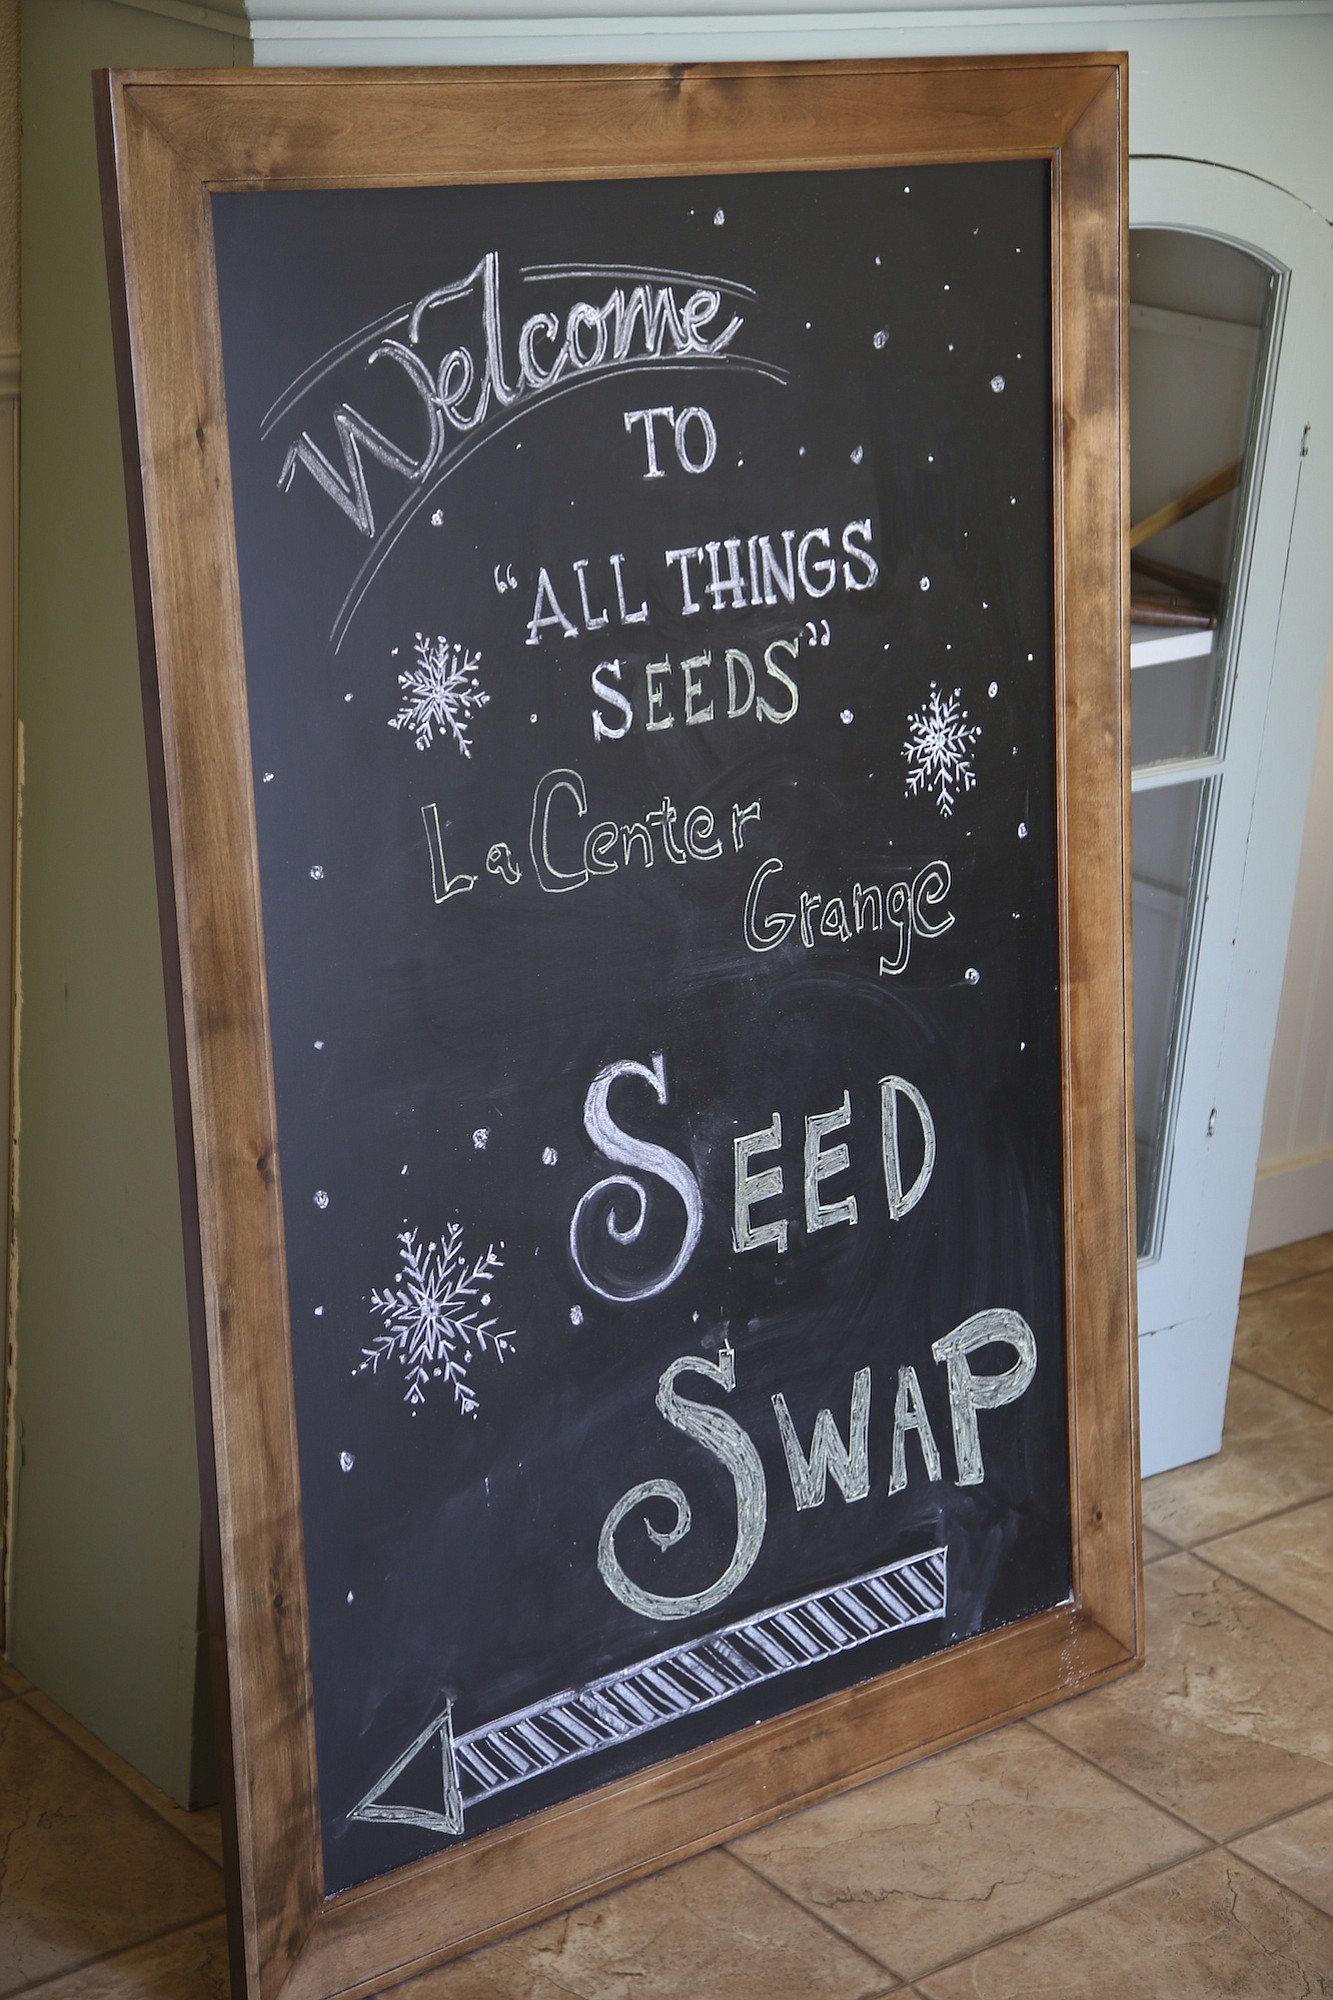 The Great Clark County Seed Swap, in its first year, collected more than a million seeds to hand out and exchange Saturday with local gardeners at the La Center Grange.